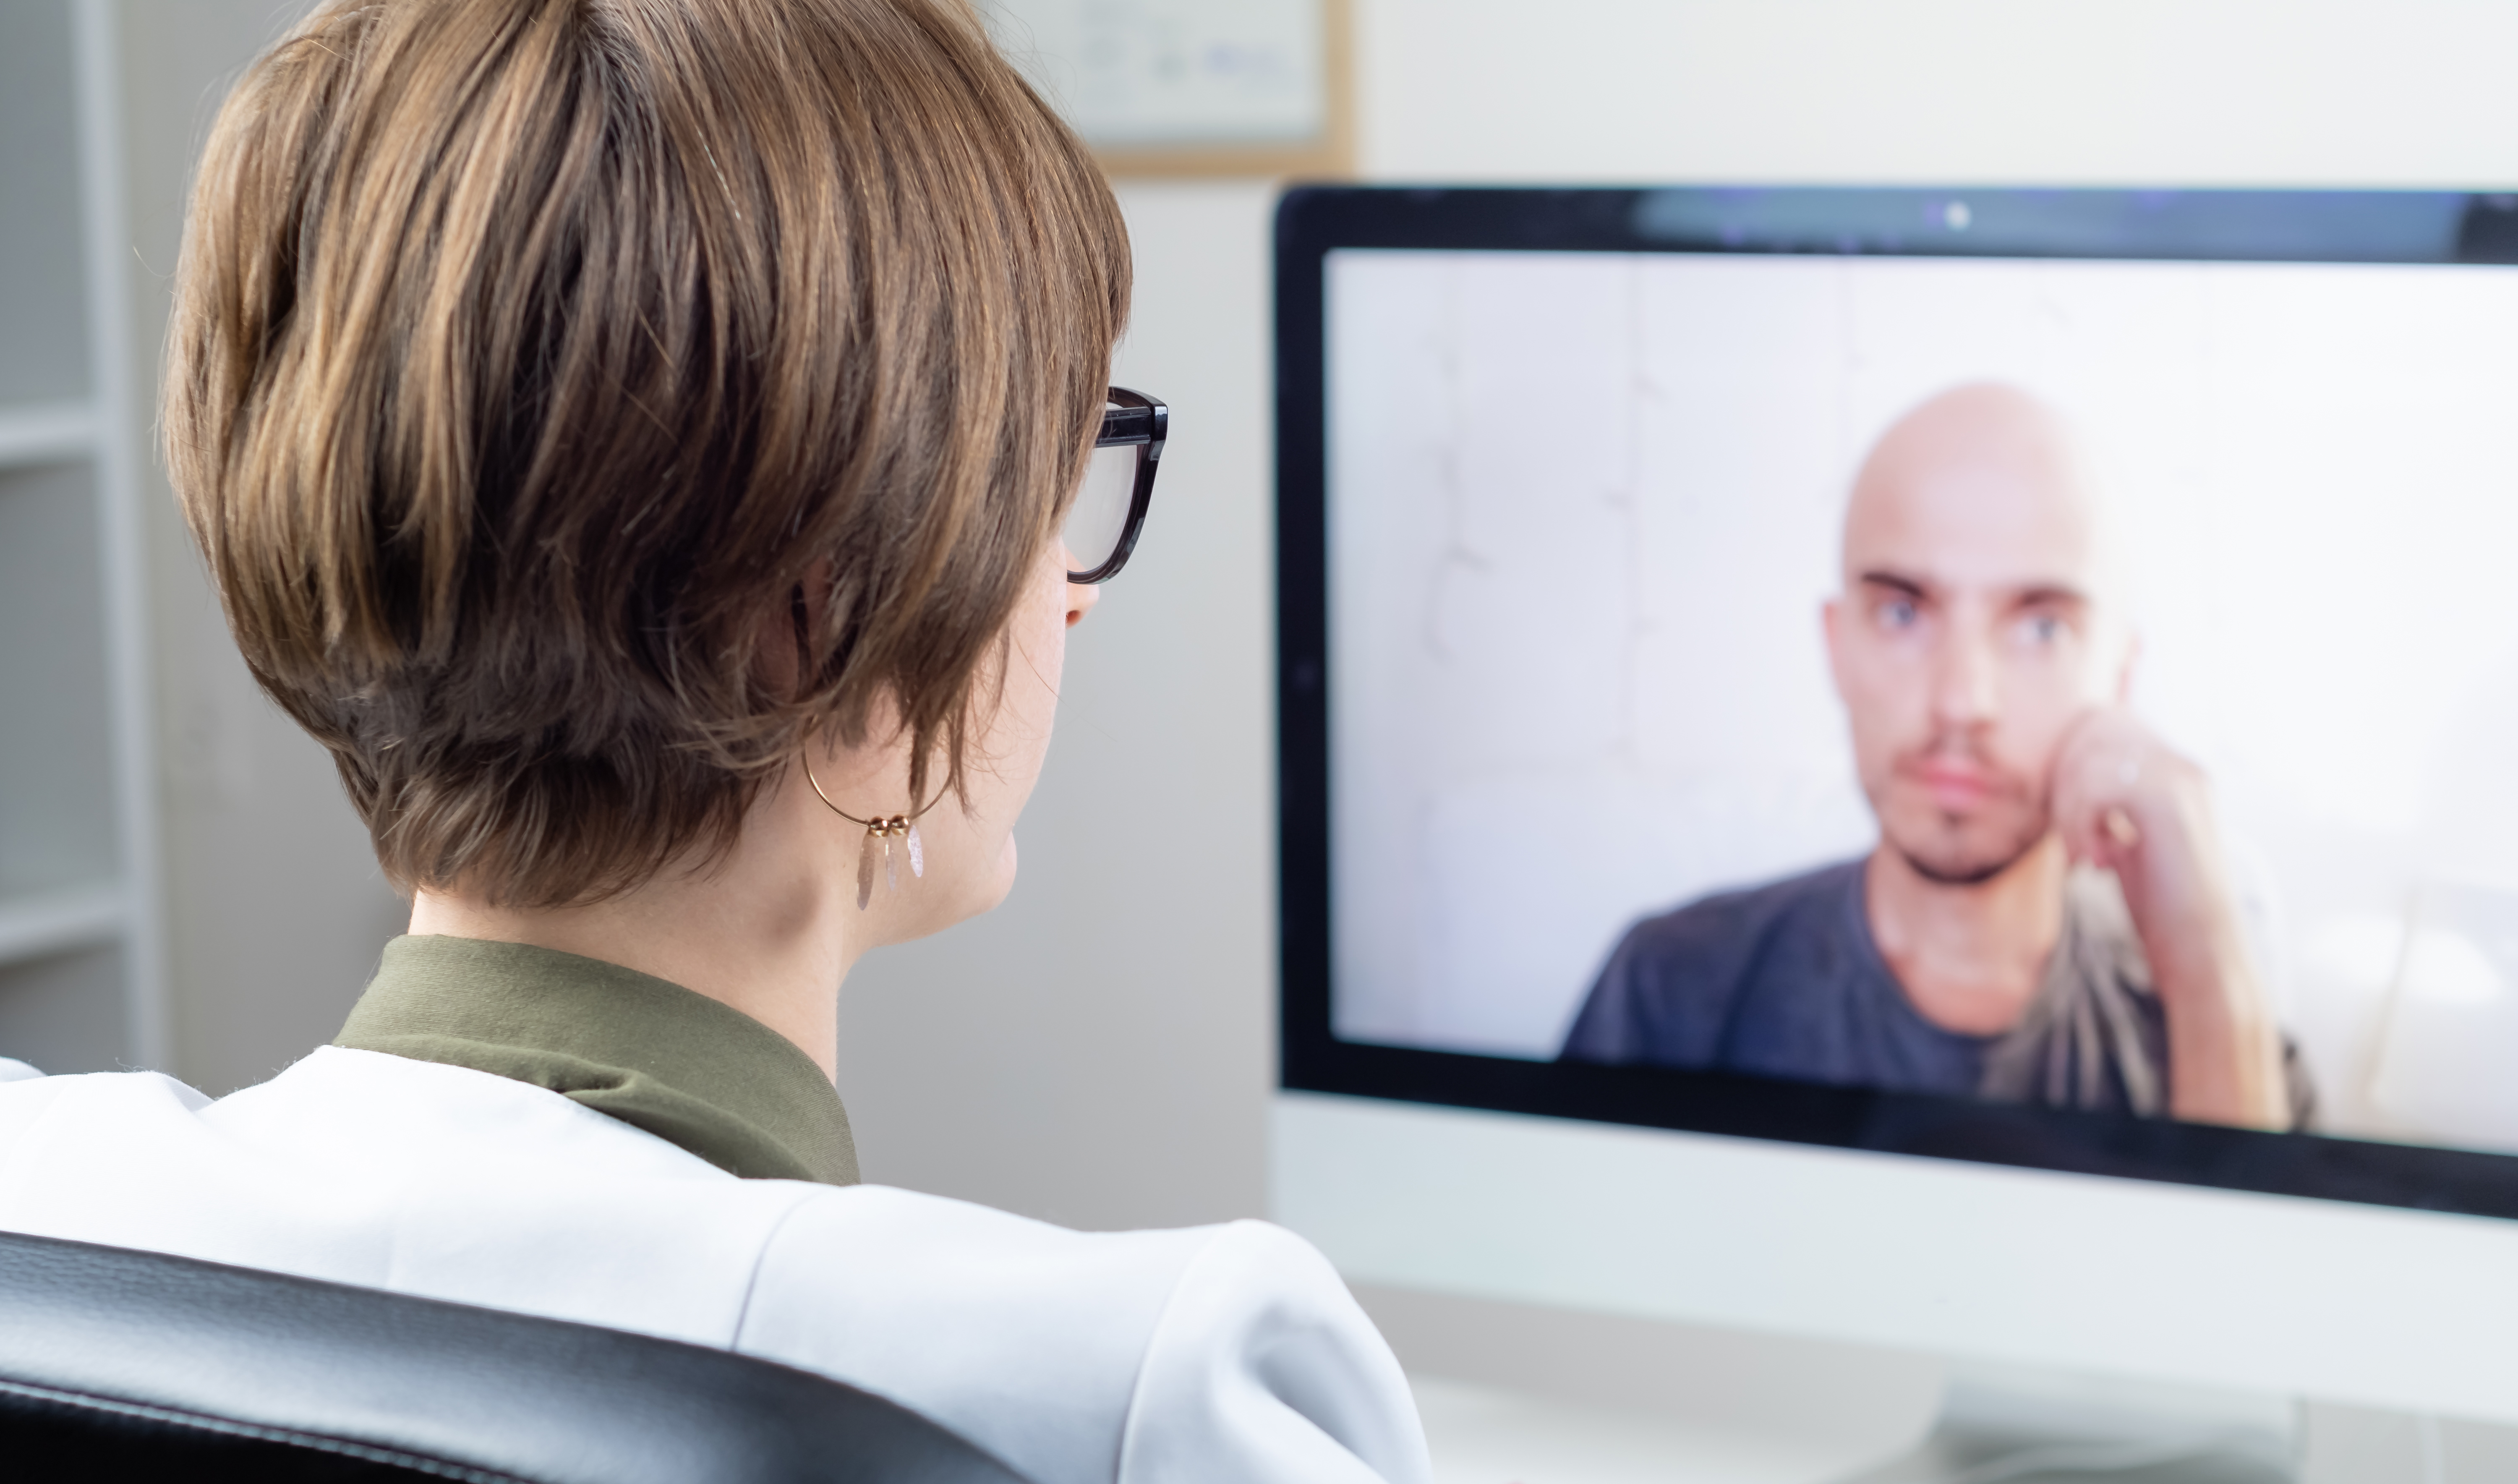 Physician speaking with patient via telehealth